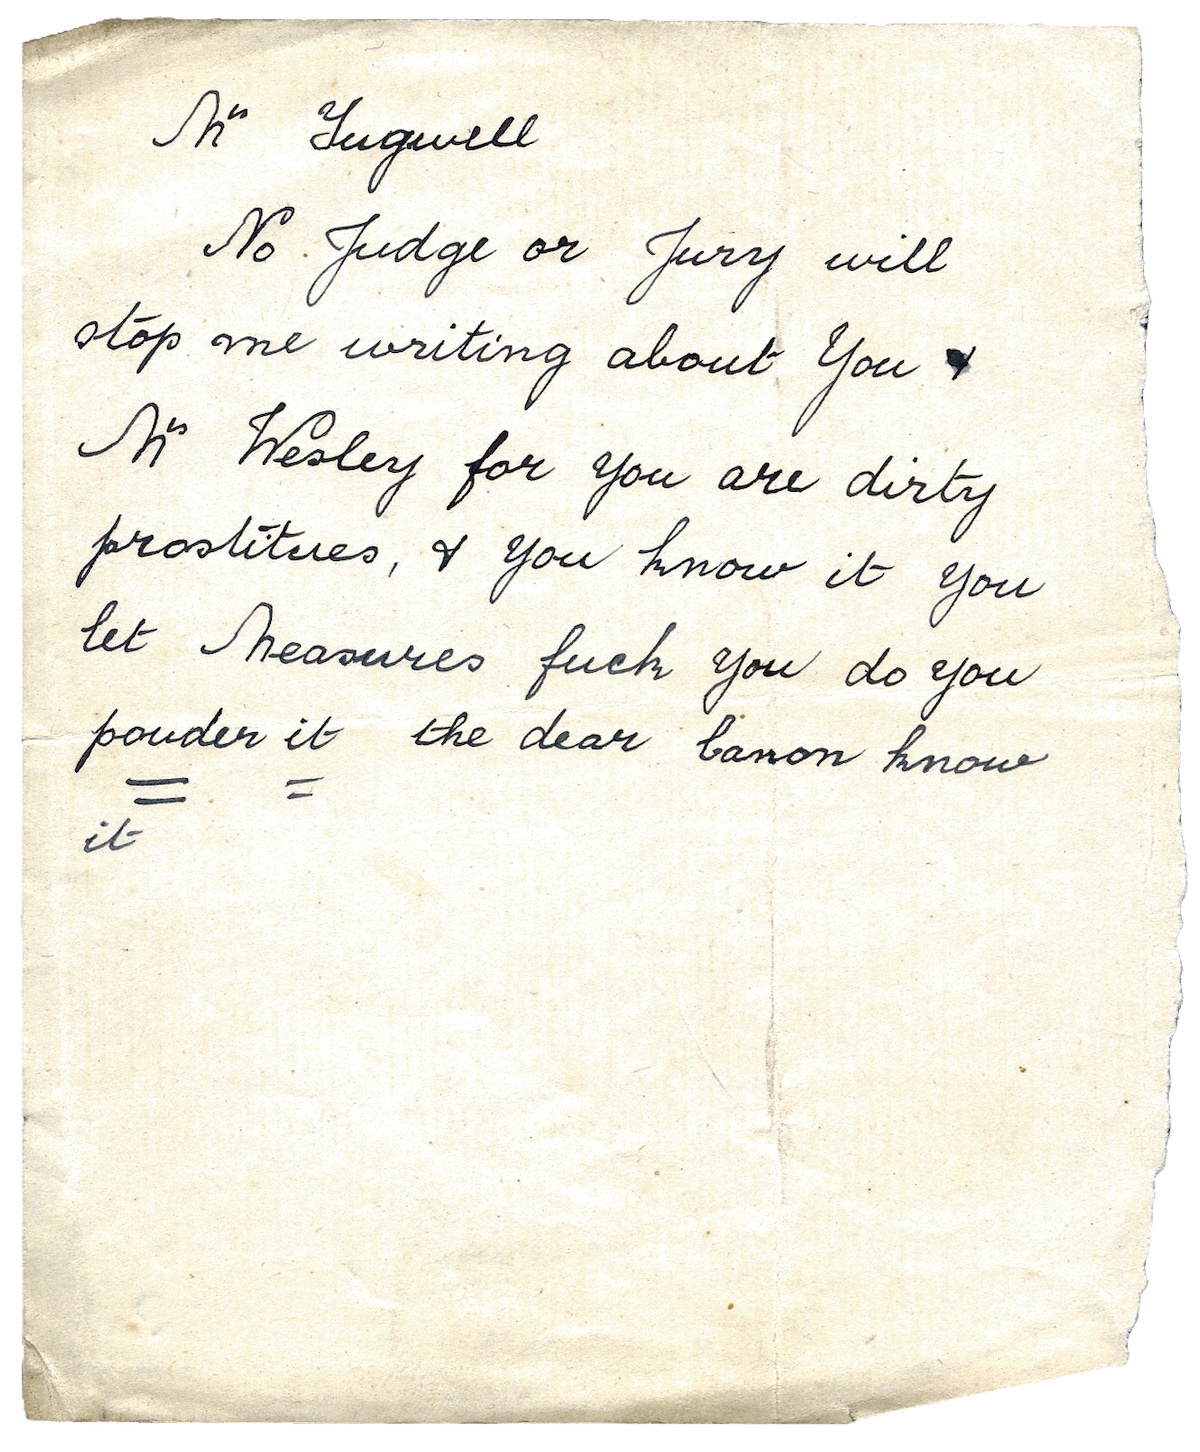 A letter used in the libel case against Annie Tugwell, 1909-13. MEPO 3/189, Criminal libel: "The Sutton Libel Case" (Mrs Annie Tugwell), 1909-1913.